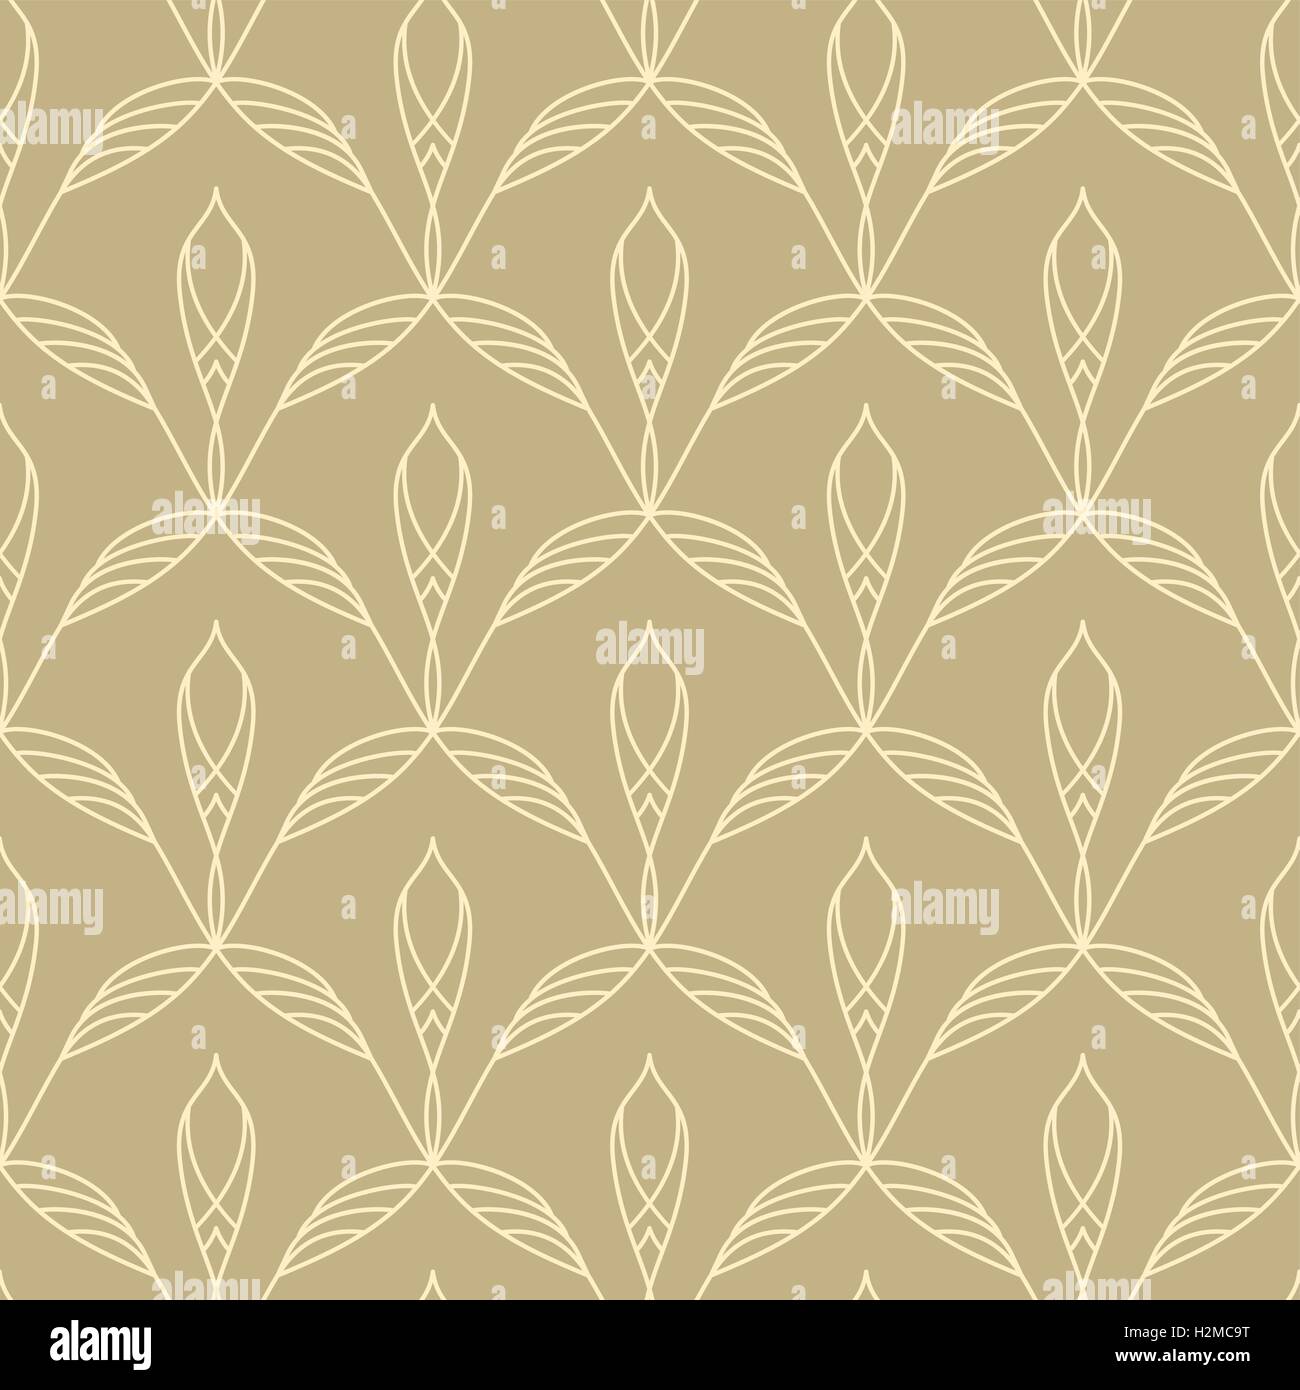 Repeating floral linear seamless pattern Stock Vector